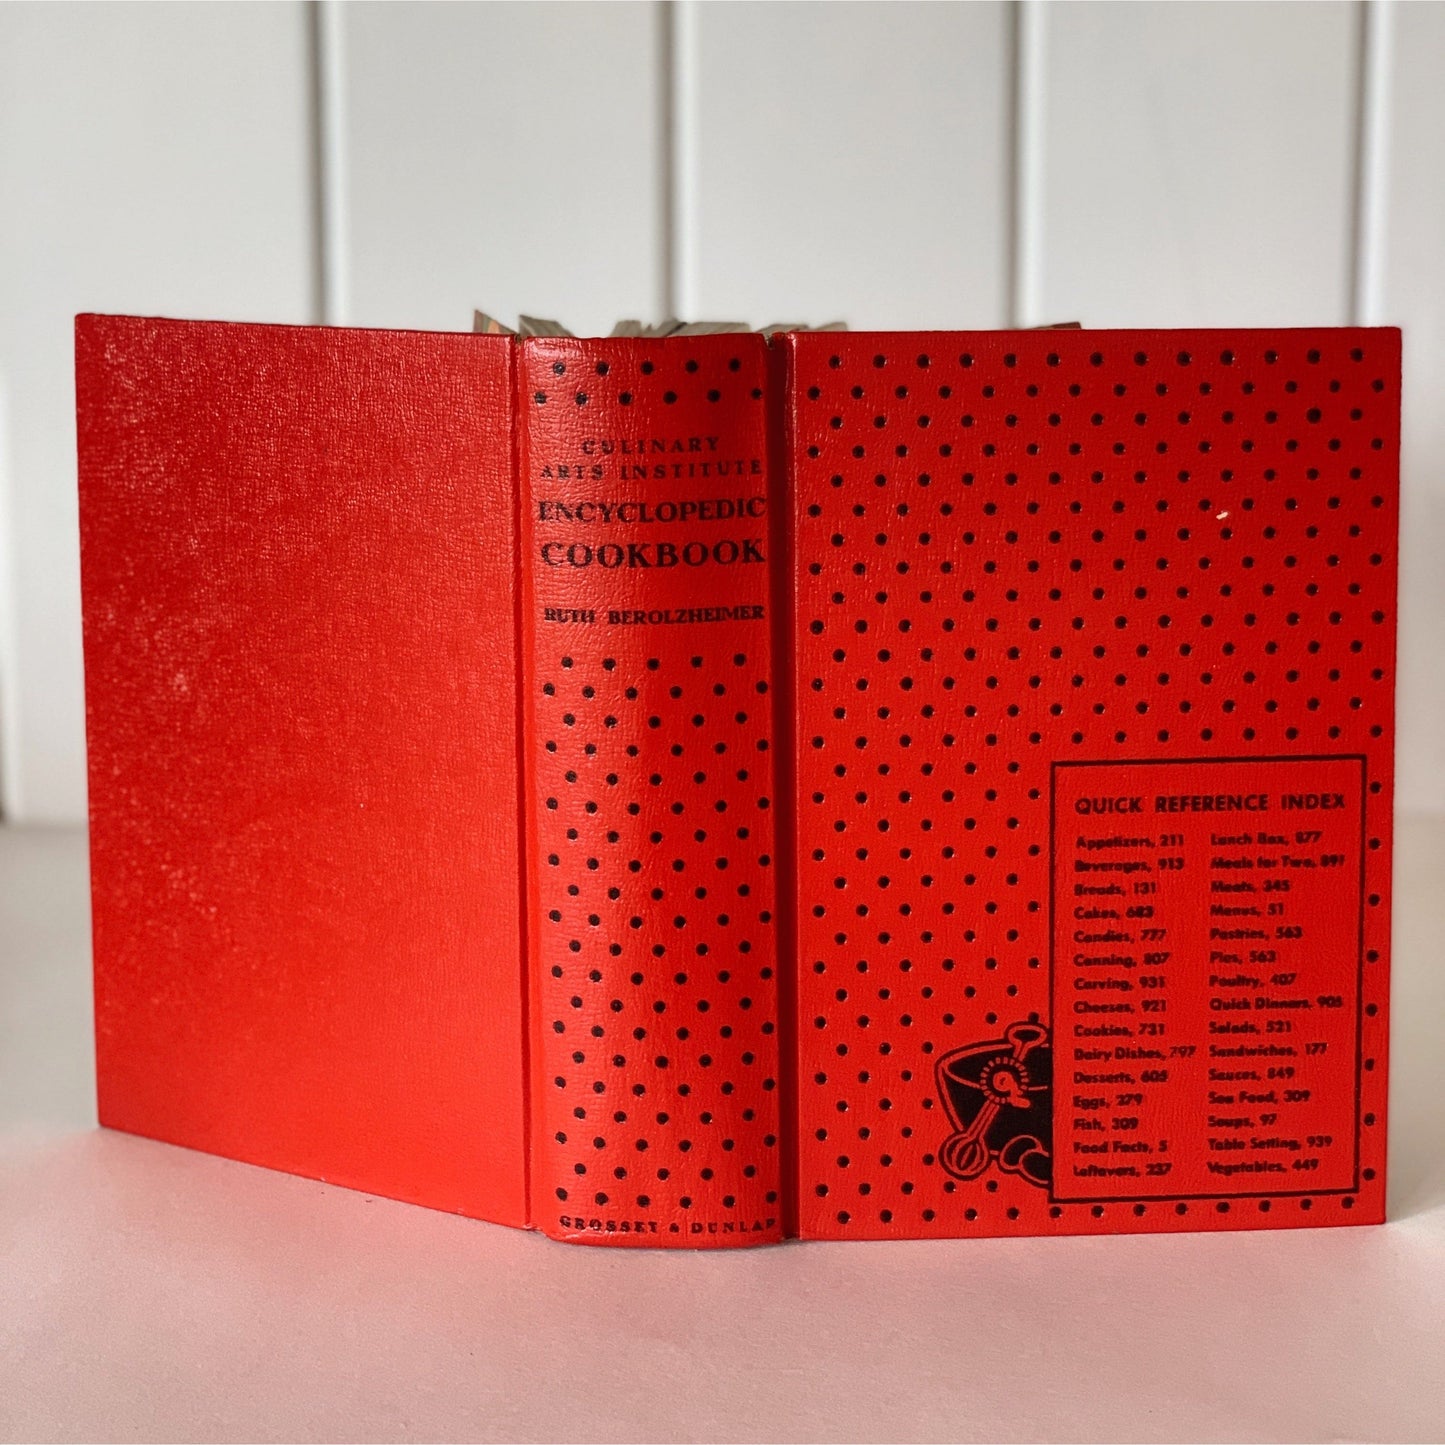 Culinary Arts Institute Encyclopedic Cookbook, Red Polka Dot w/Dust Jacket, 1974